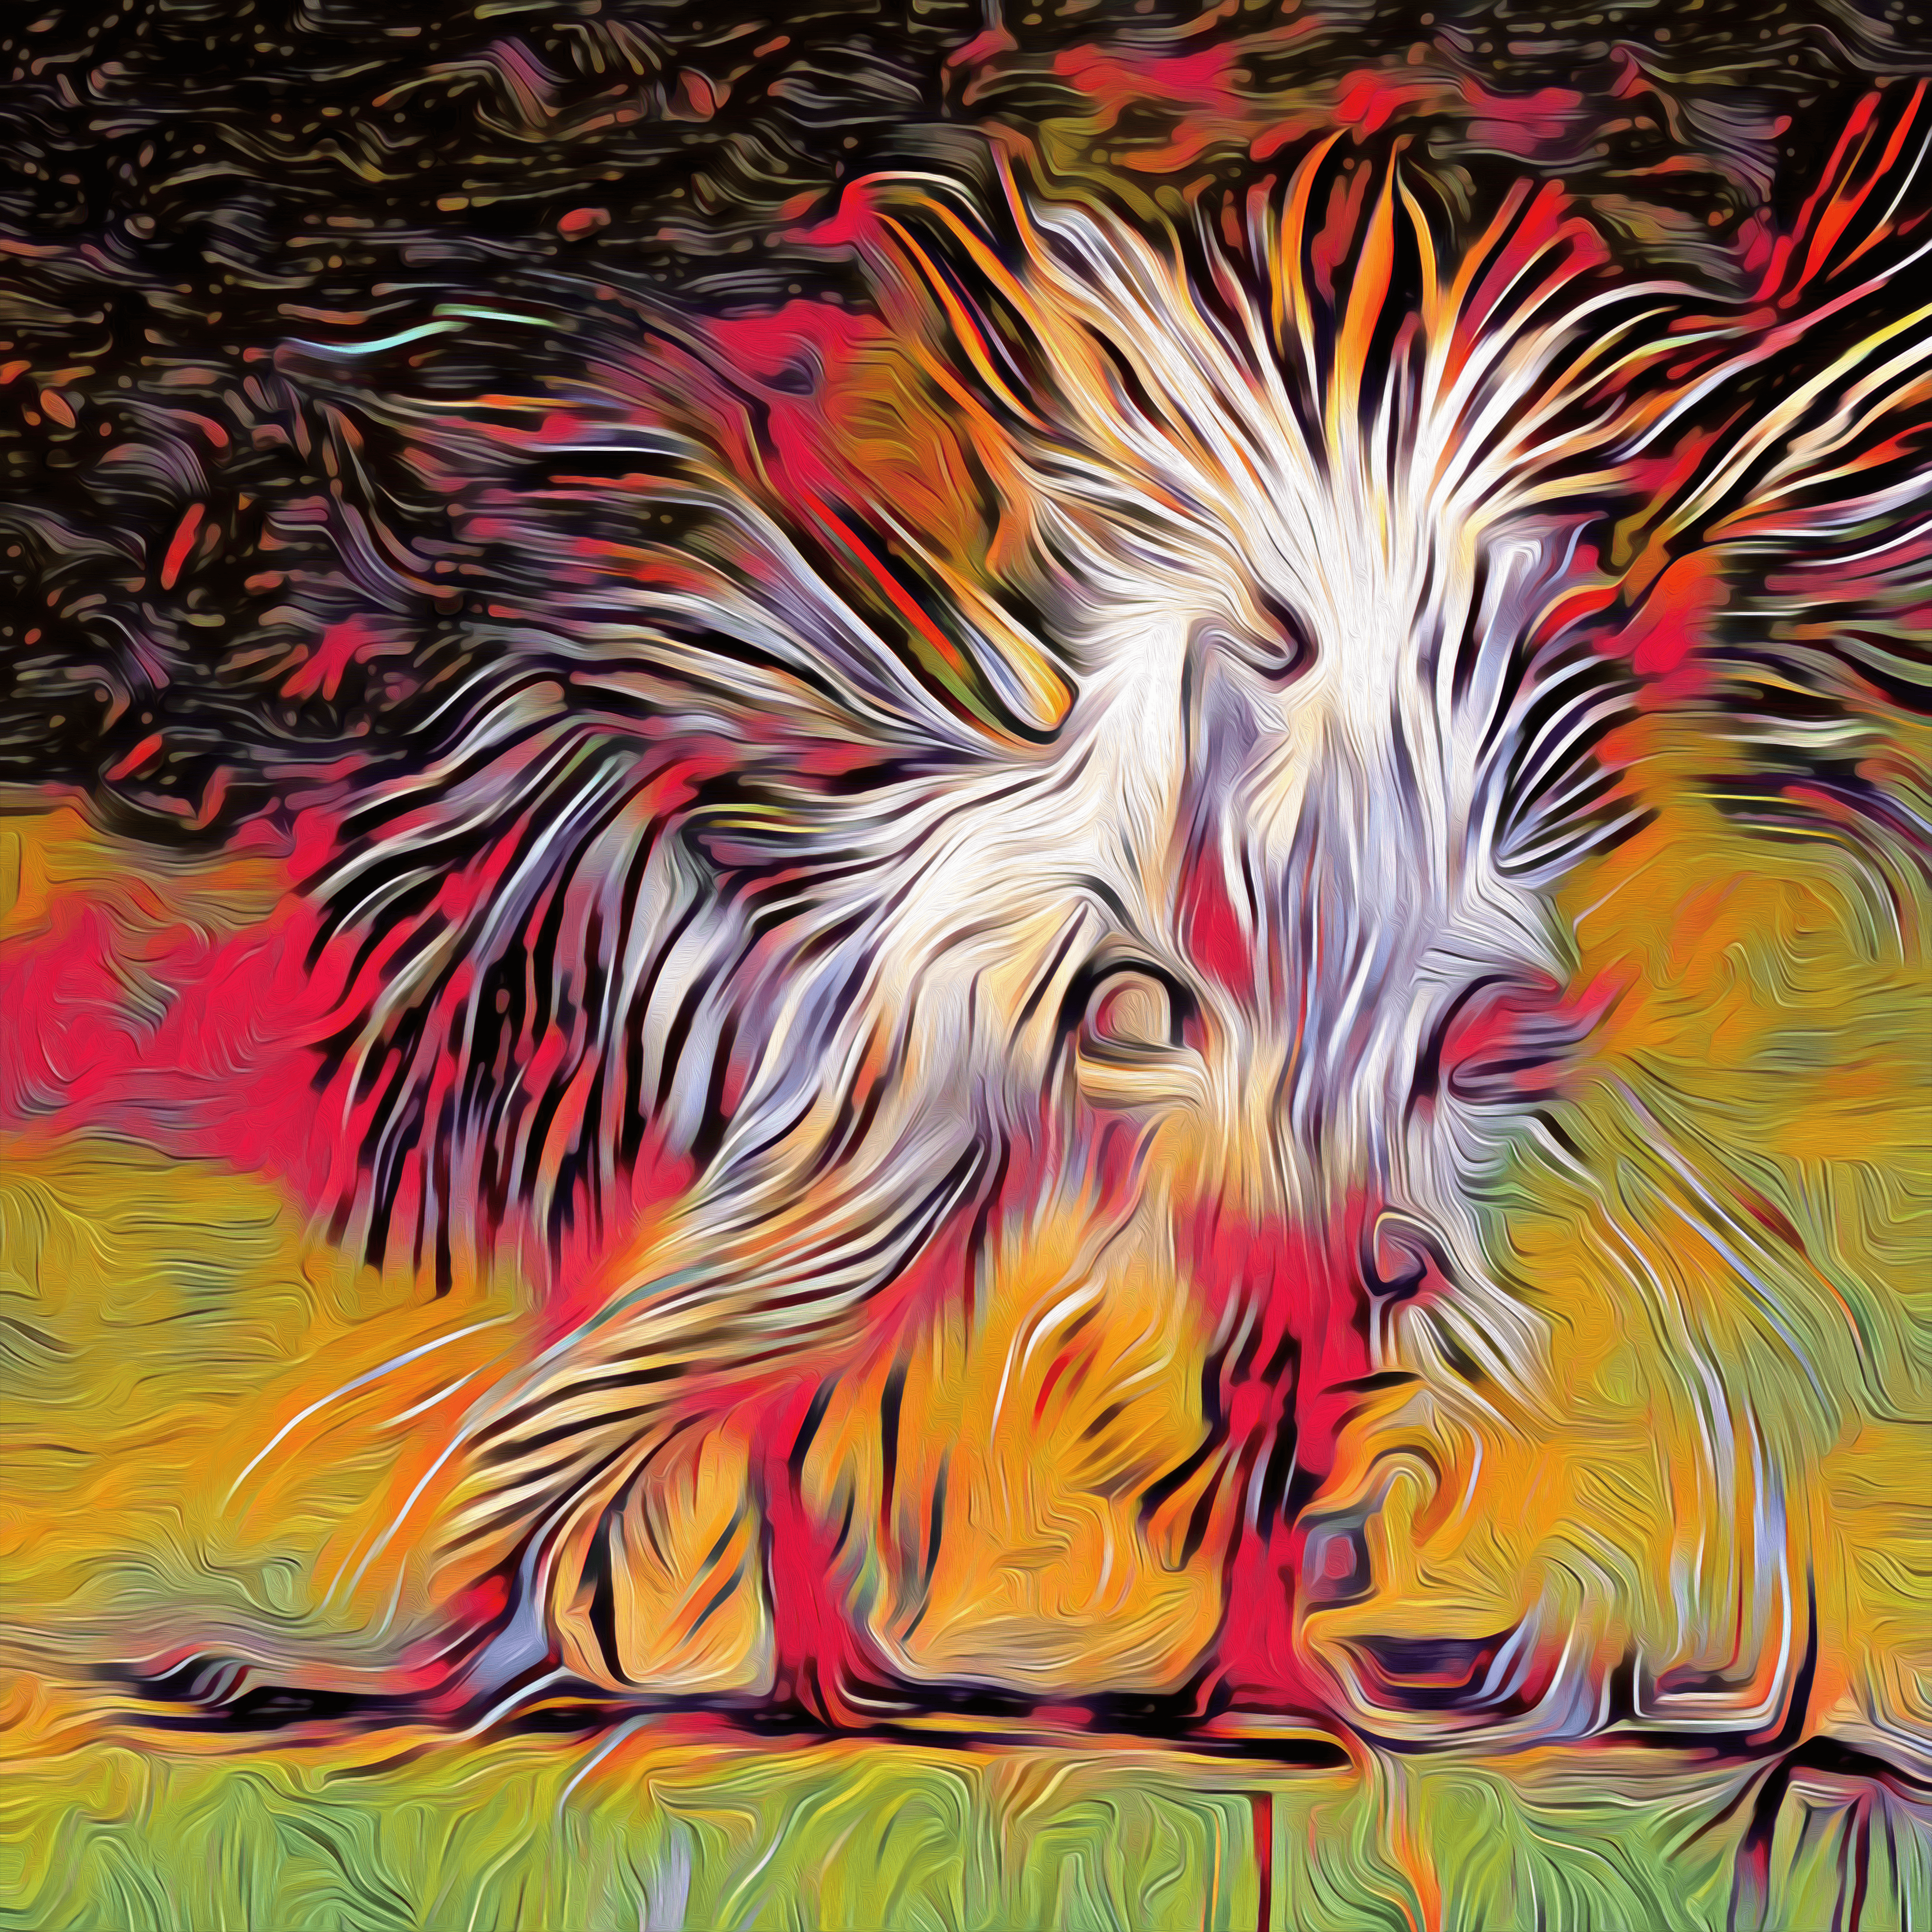 Spiky Dog from Another World